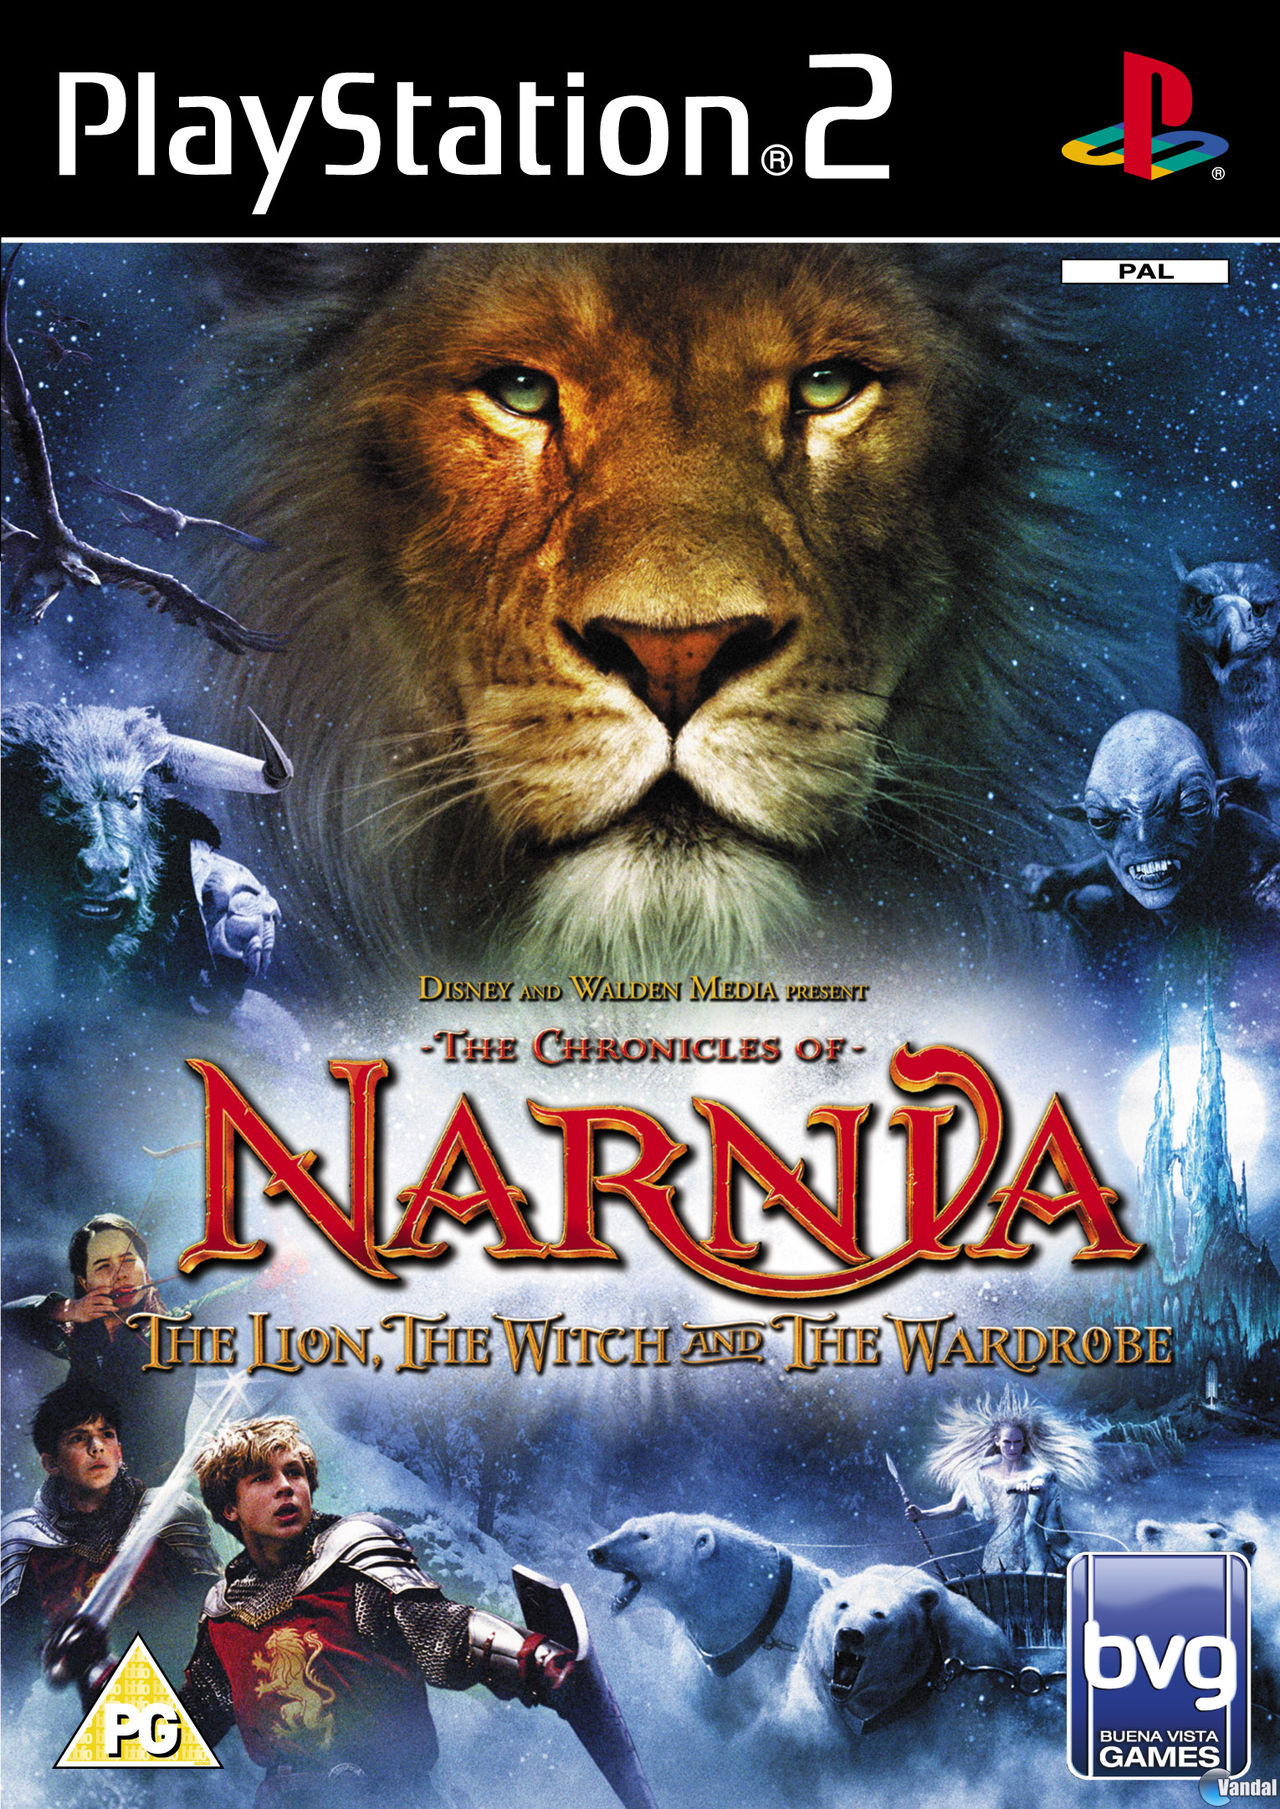 Crónicas de Narnia - (PS2, NDS, GameCube, Game Boy Advance y PC) - Vandal